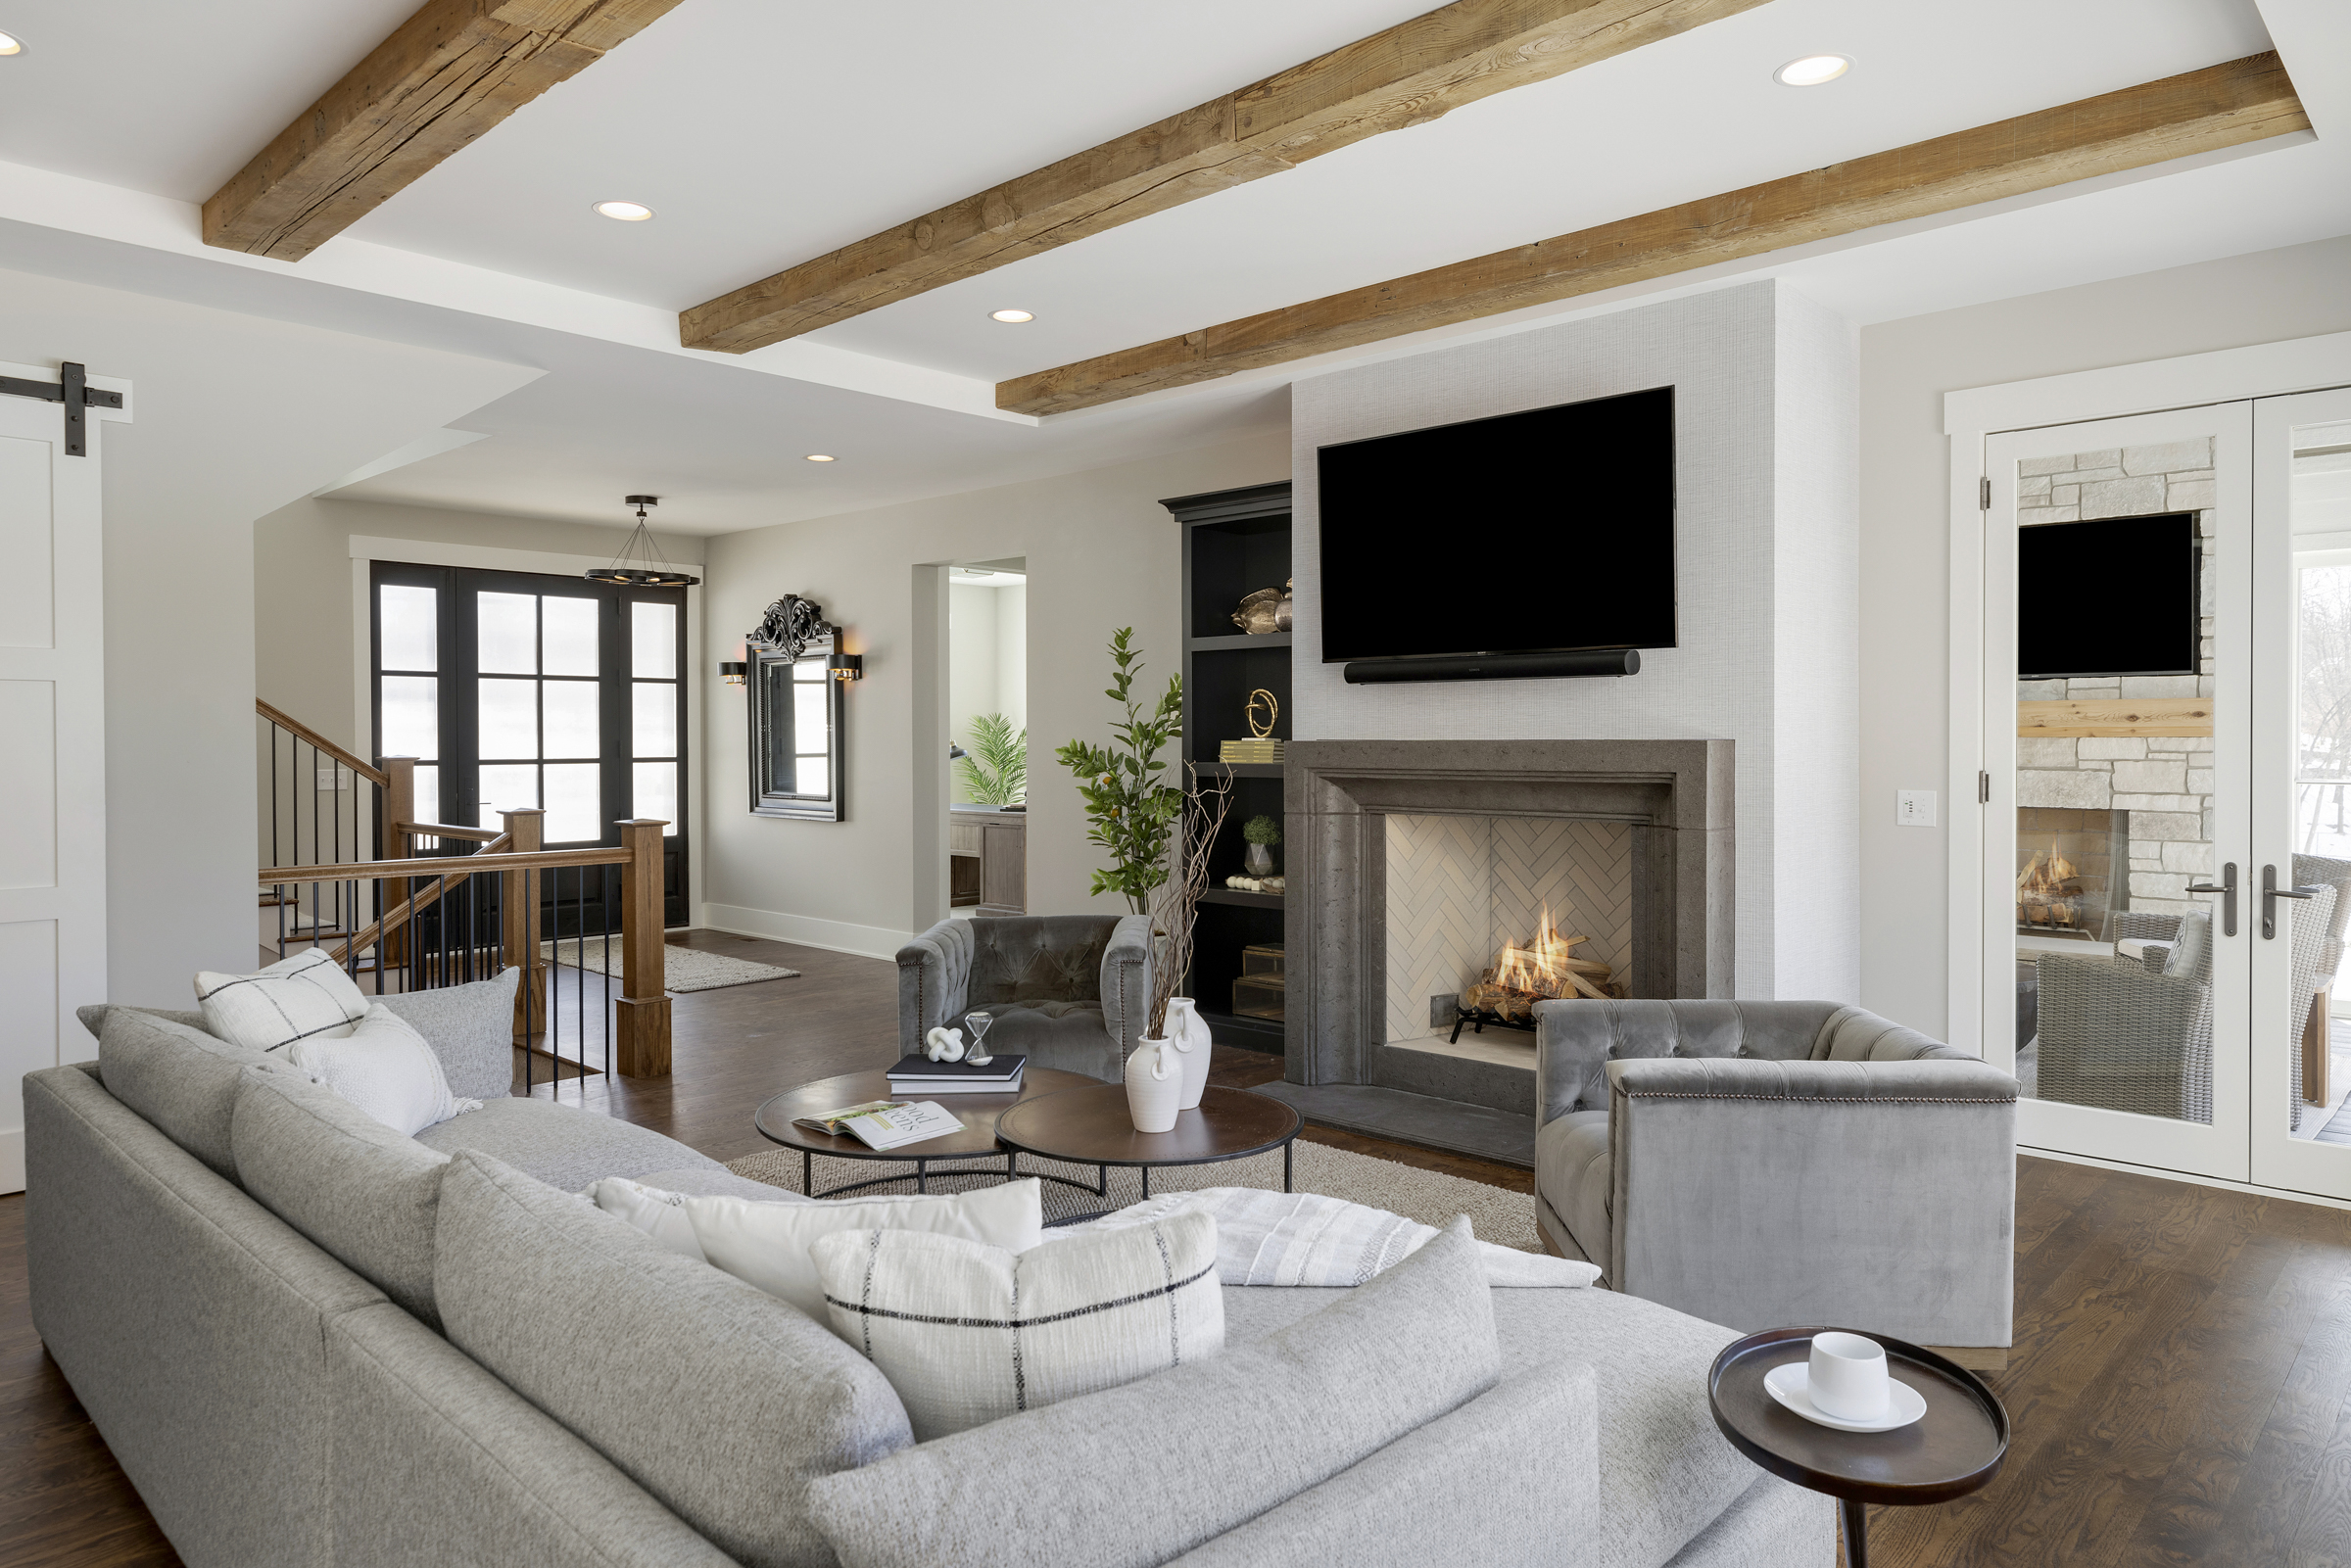 A living room with wood beams and a fireplace.